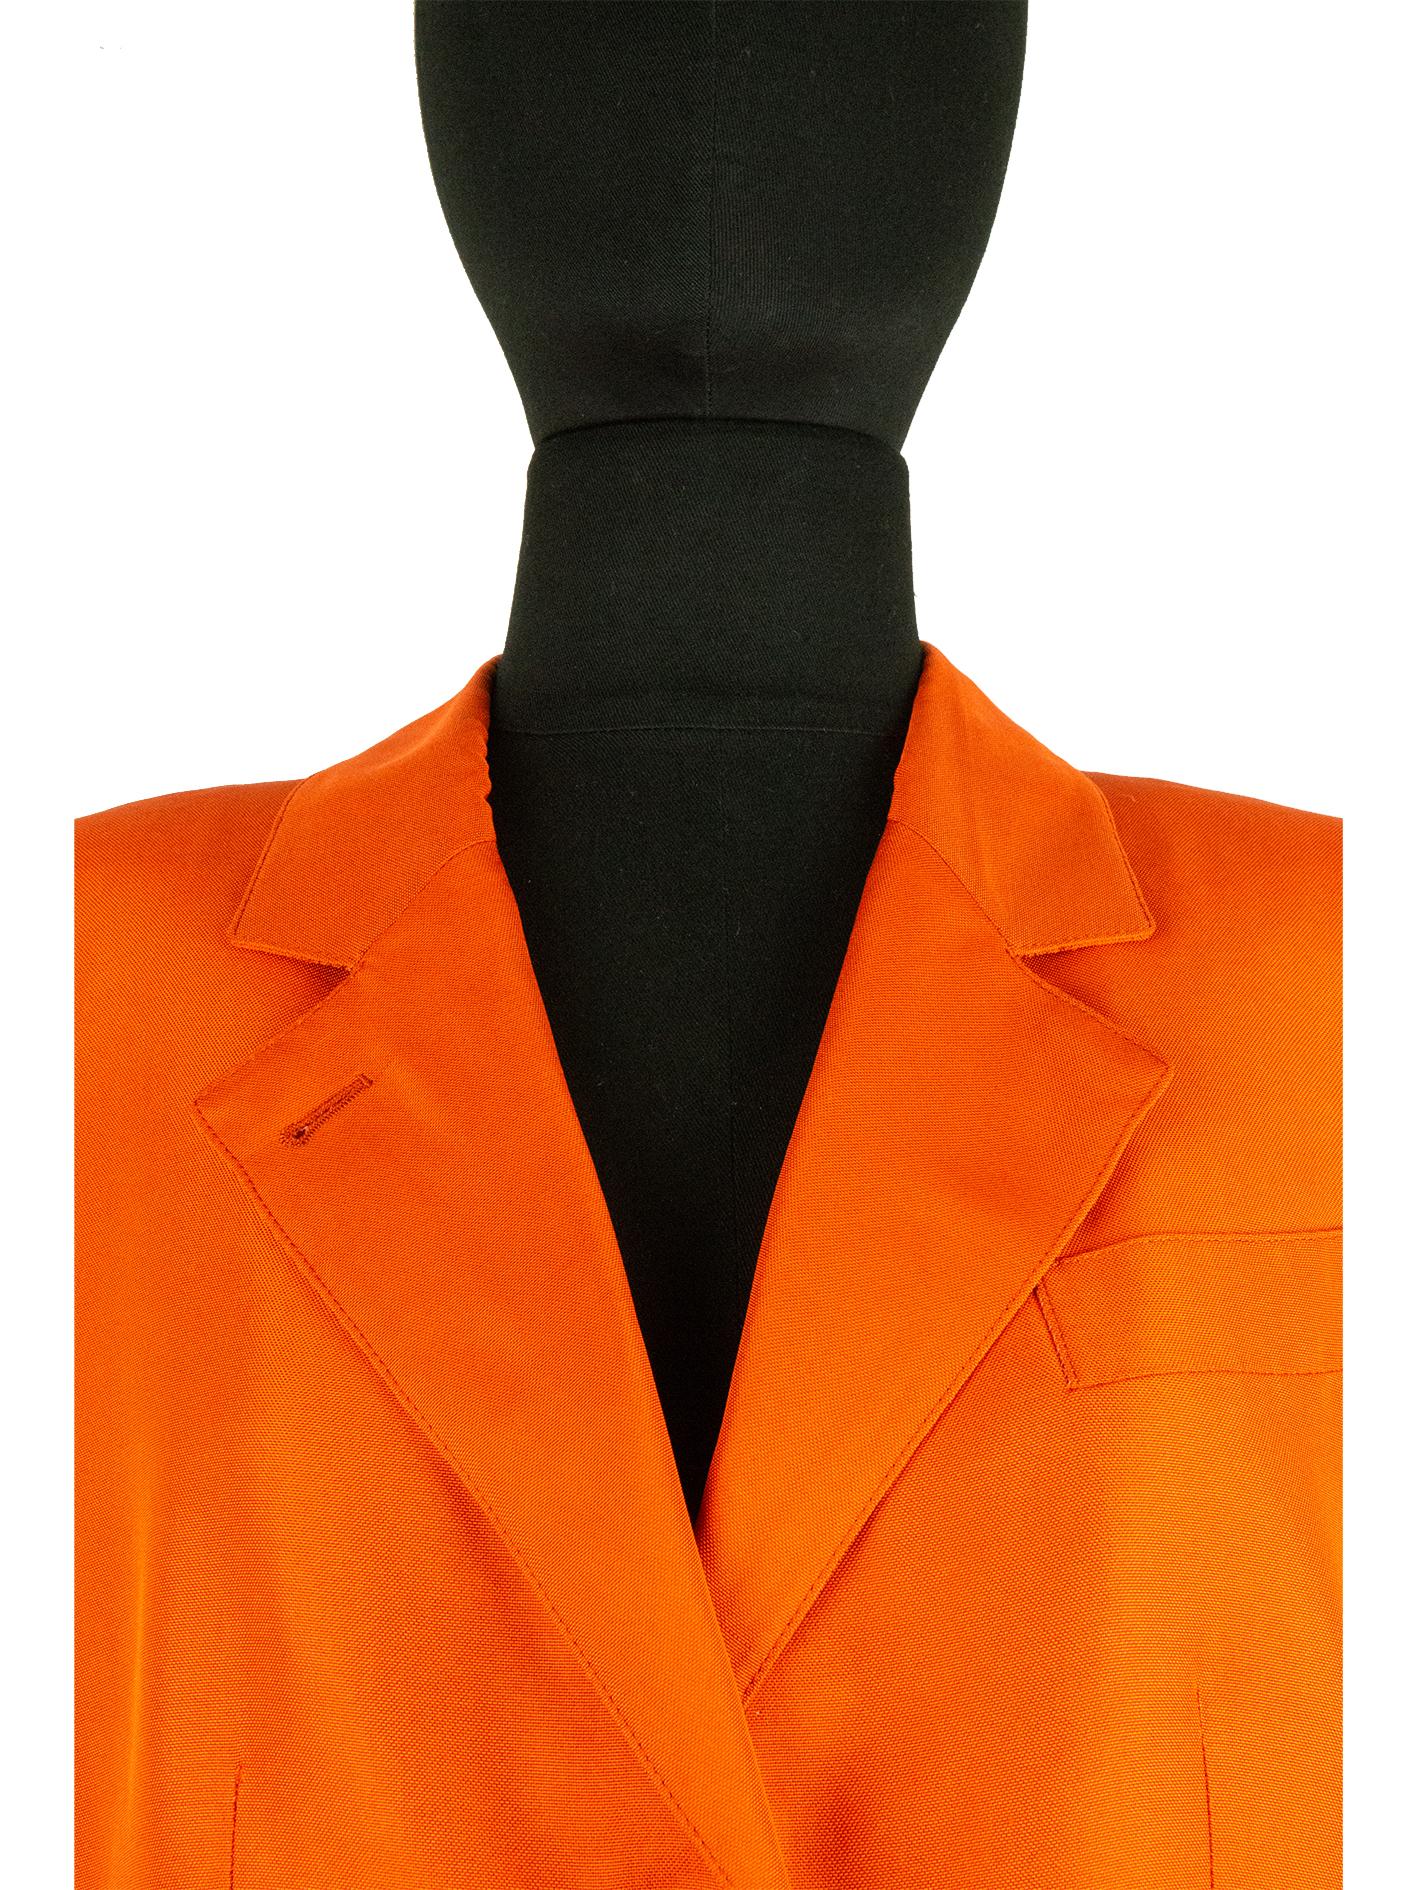 A burnt orange Hermès single-breasted blazer. This long single-breasted blazer features a notched lapel with a decorative buttonhole on the right side. Just below the lapel are three gold-coloured buttons in the shape of two-piece of bamboo. At the